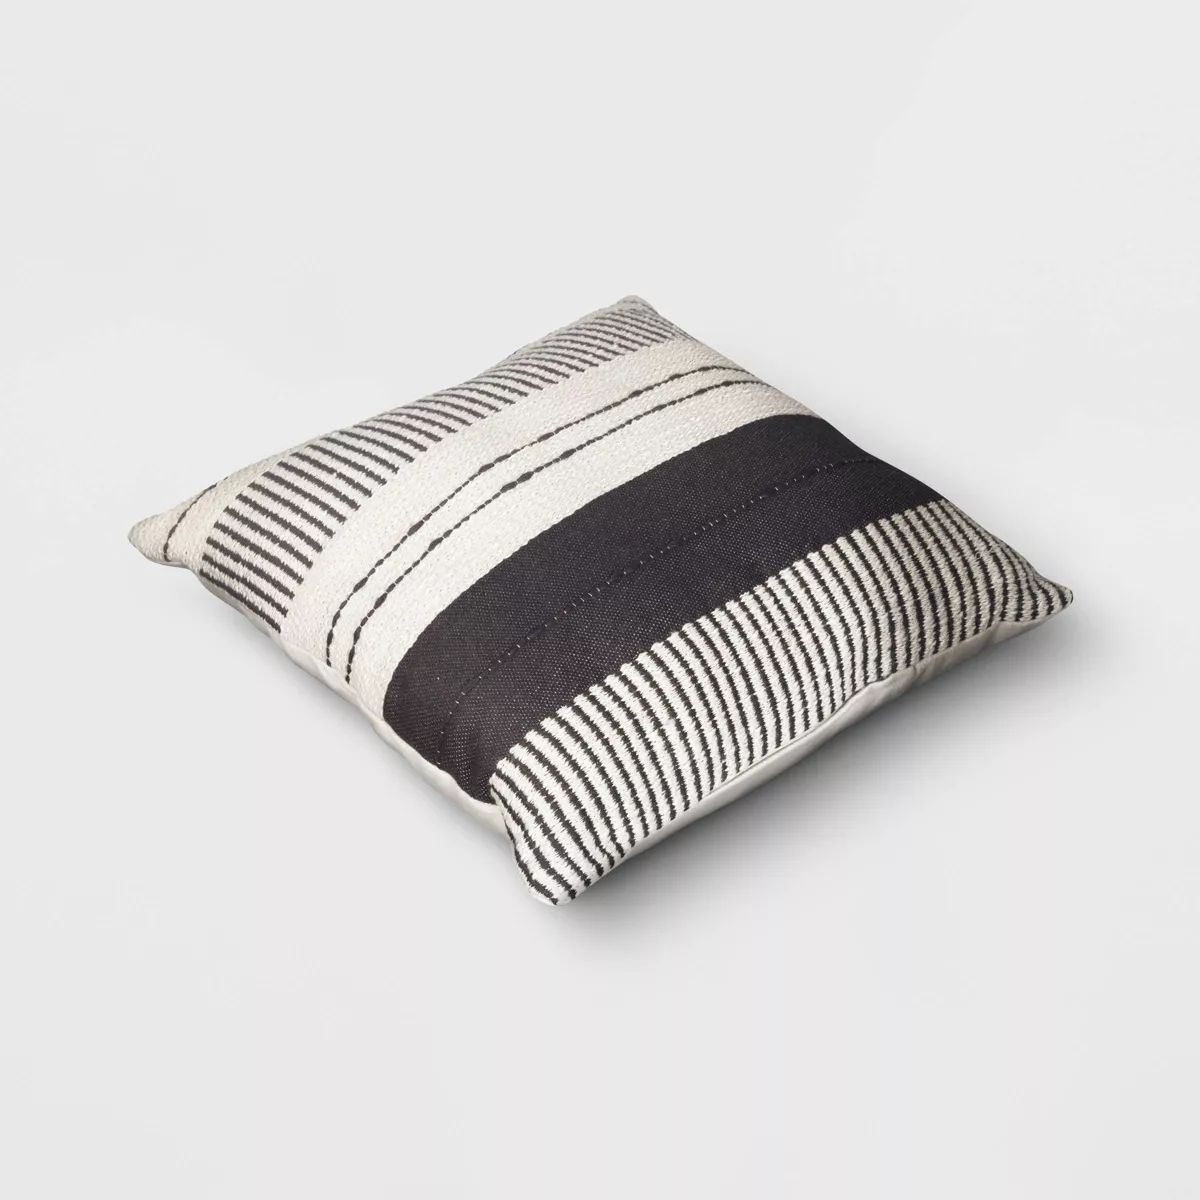 18"x18" Stripes and Dashes Square Outdoor Throw Pillow Black/Ivory - Threshold™ | Target